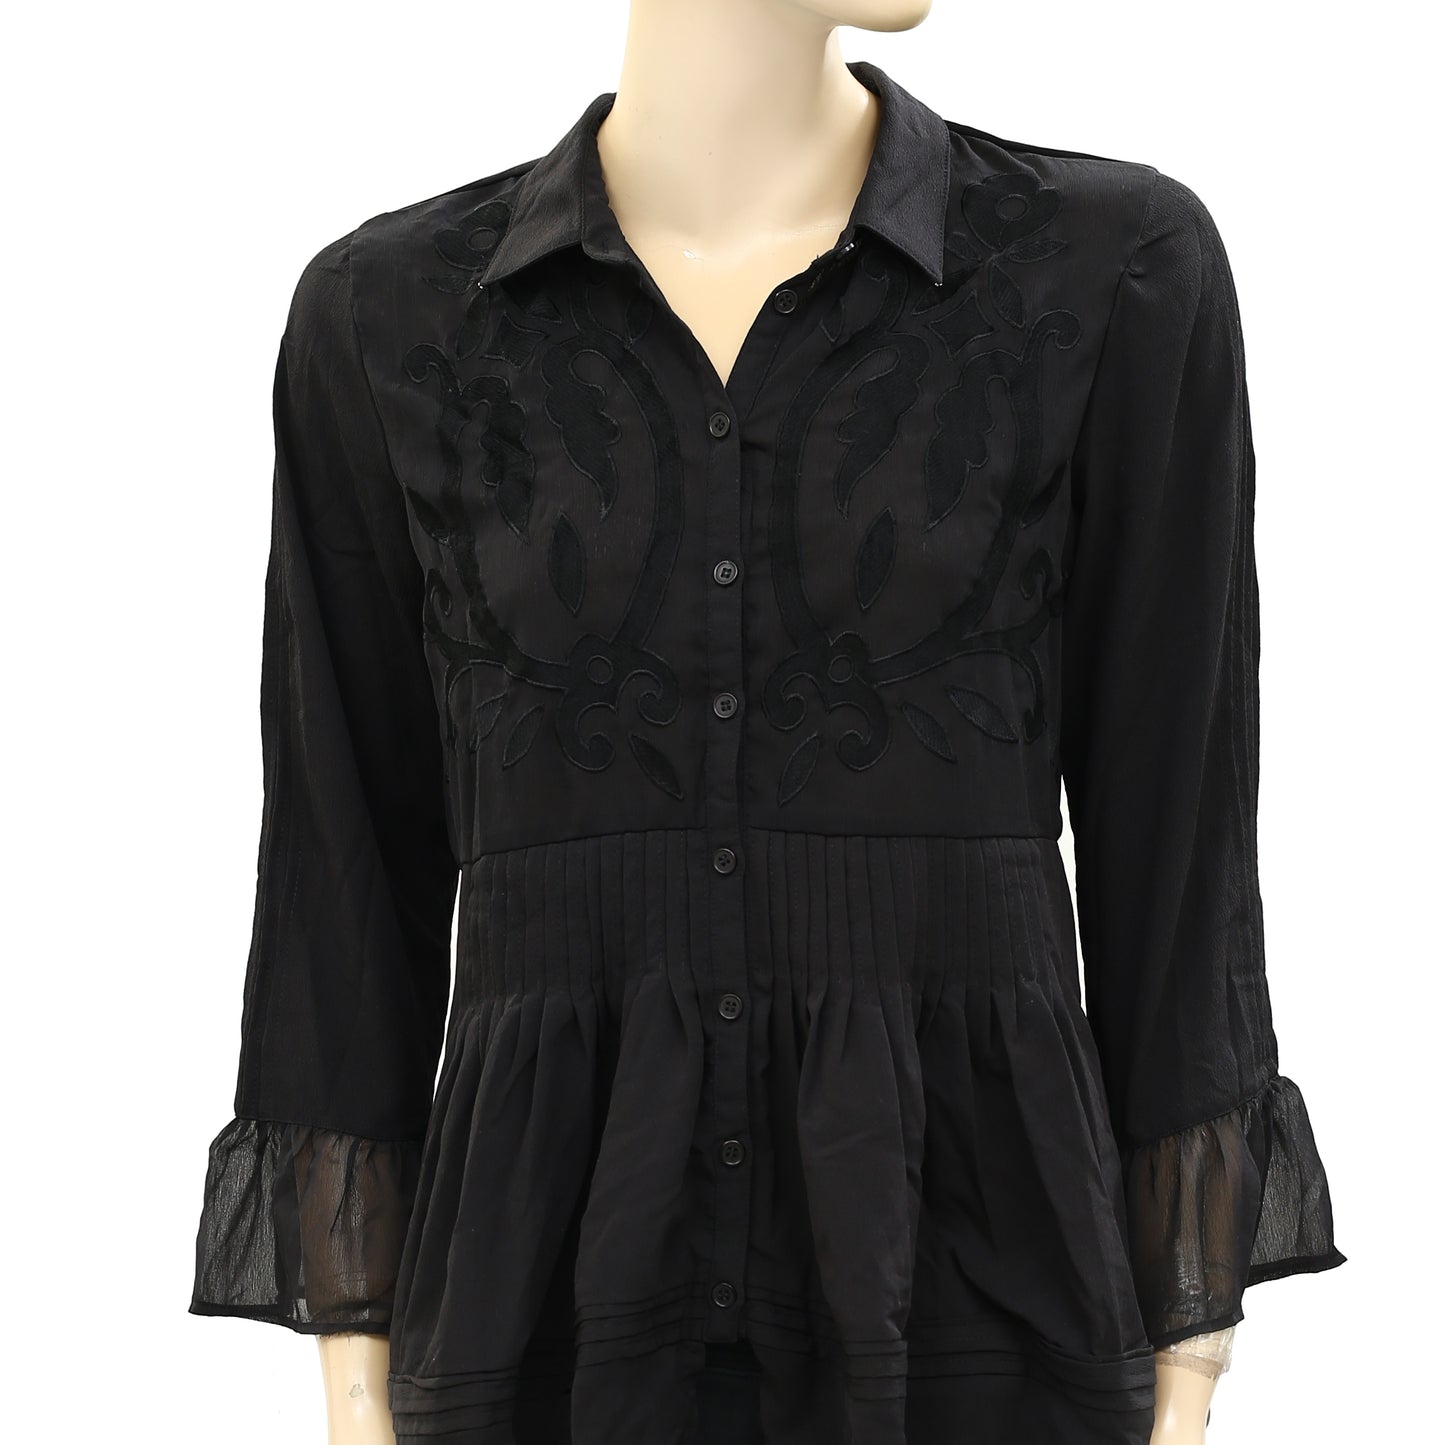 Uterque Embroidered Black Tunic Shirt Top S